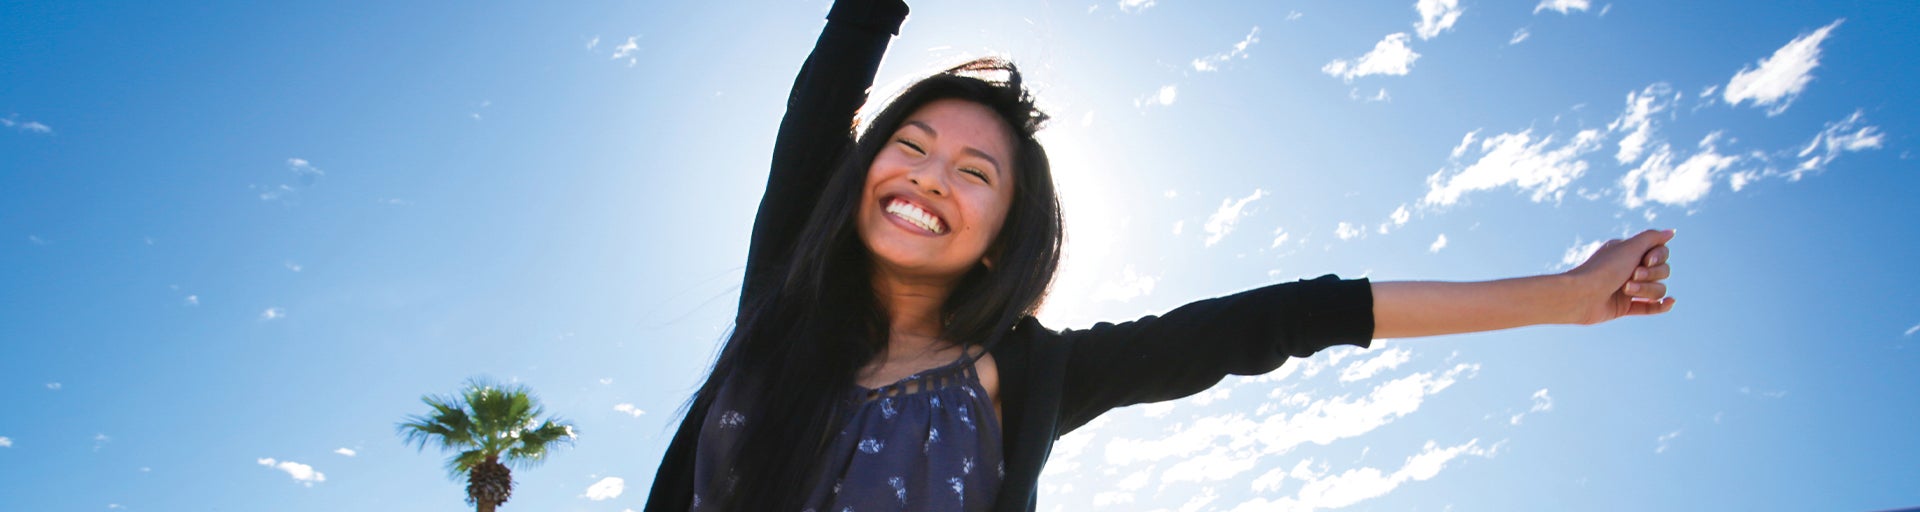 Female student smiling and reaching towards the sky